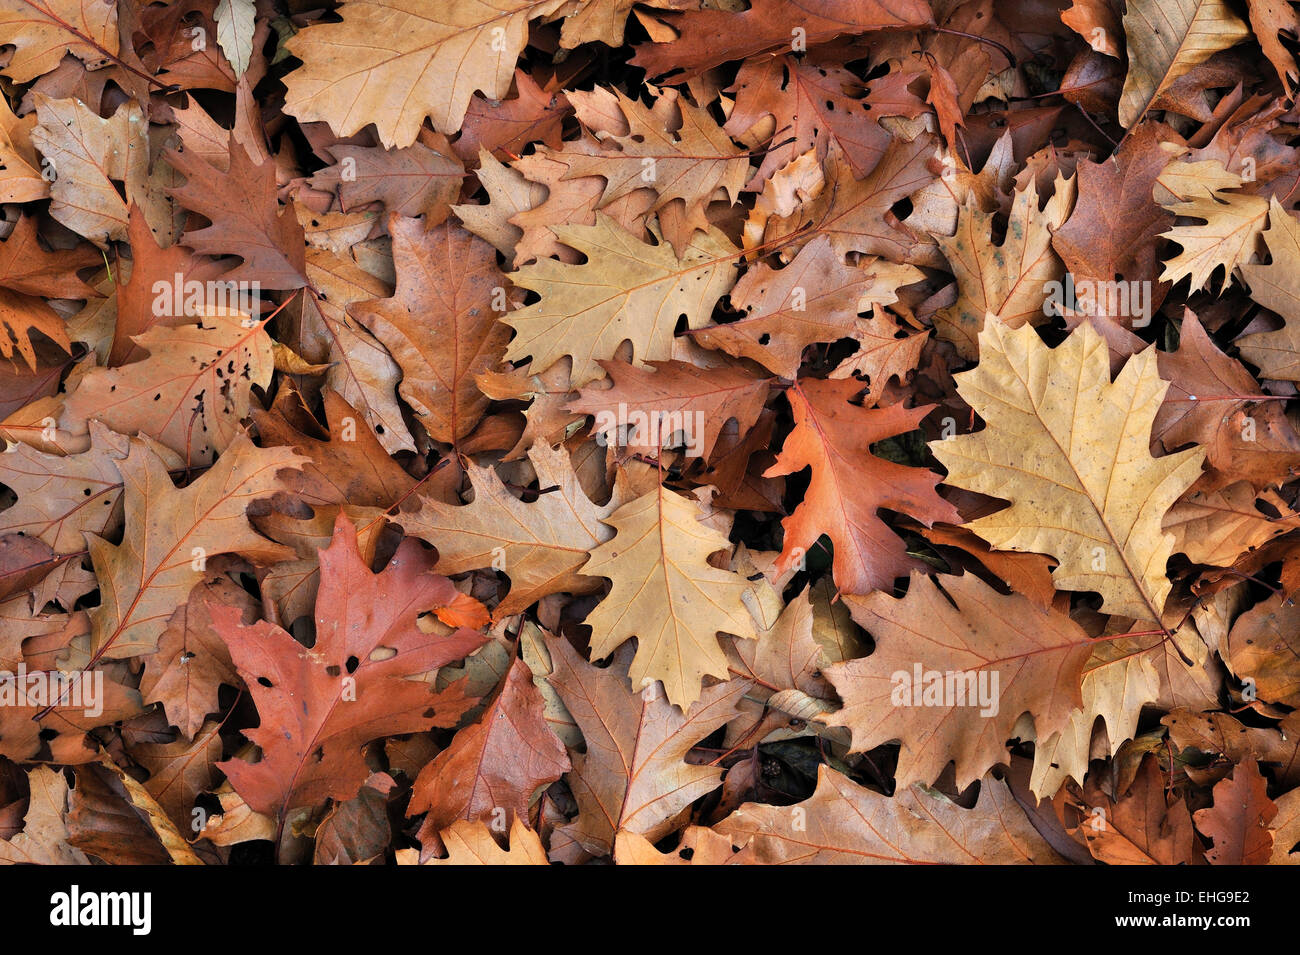 Northern red oak / champion oak (Quercus rubra / Quercus borealis) fallen leaves on the forest floor in autumn Stock Photo